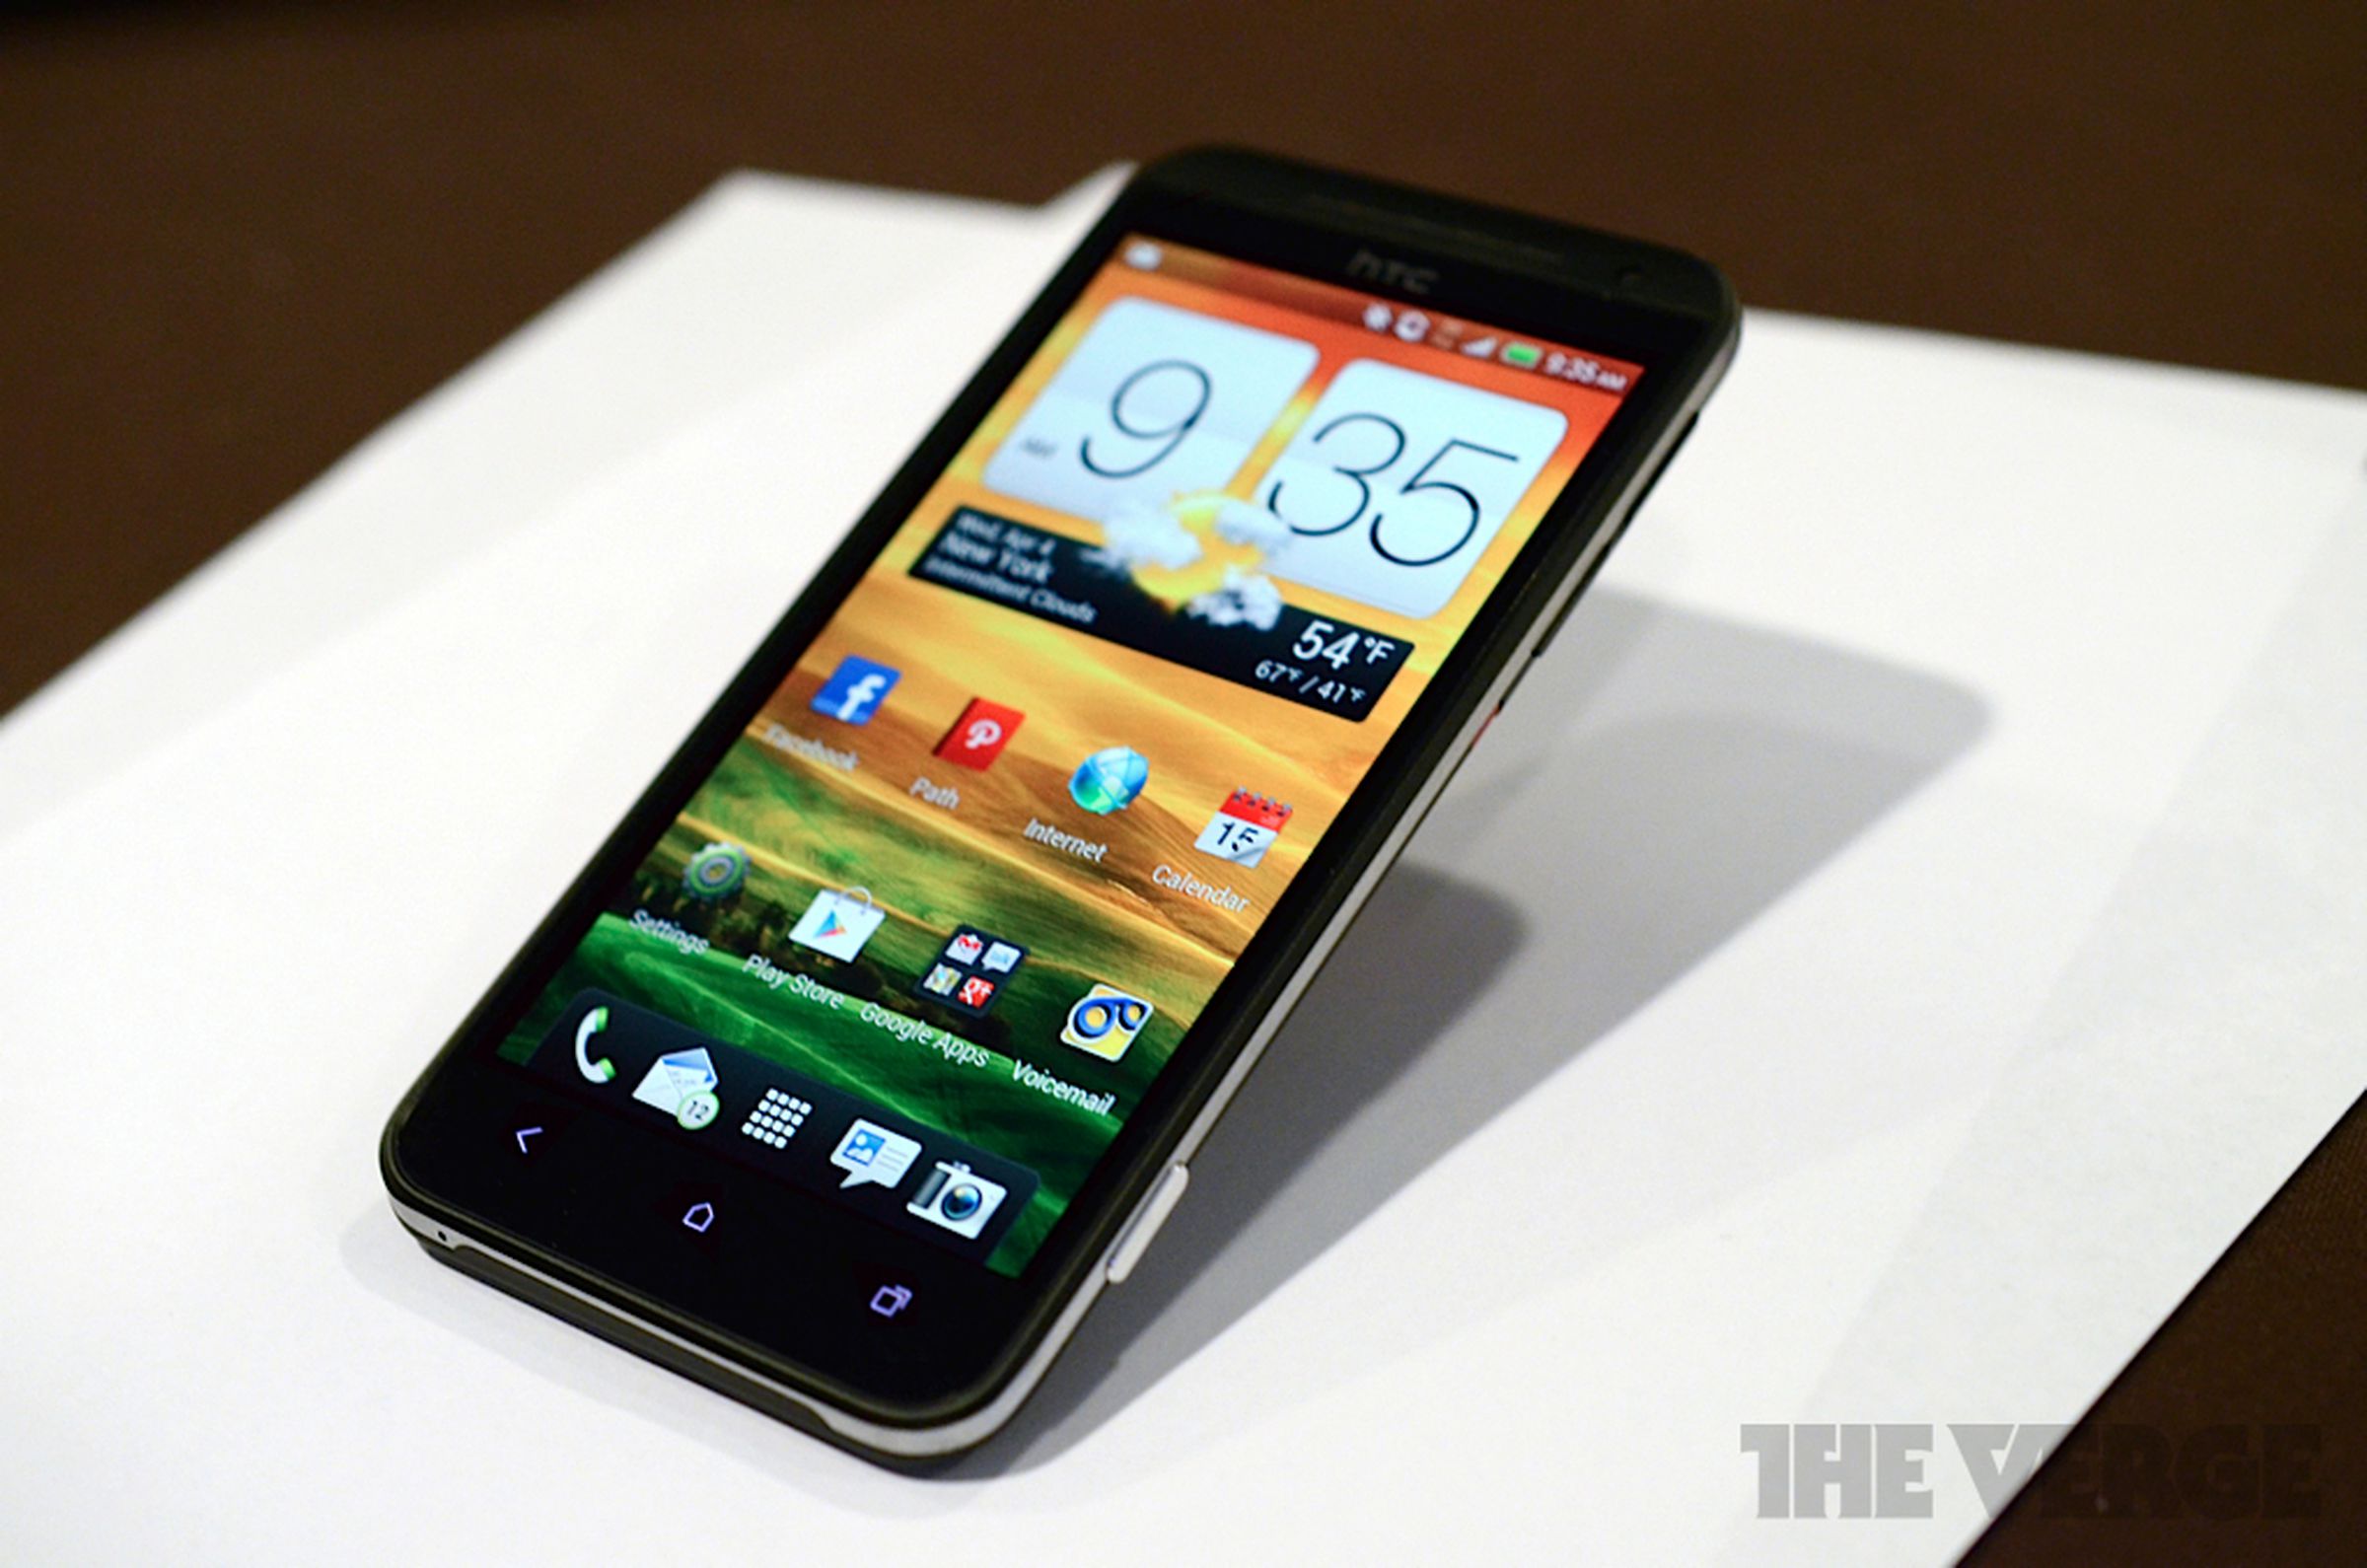 HTC Evo 4G LTE hands-on pictures